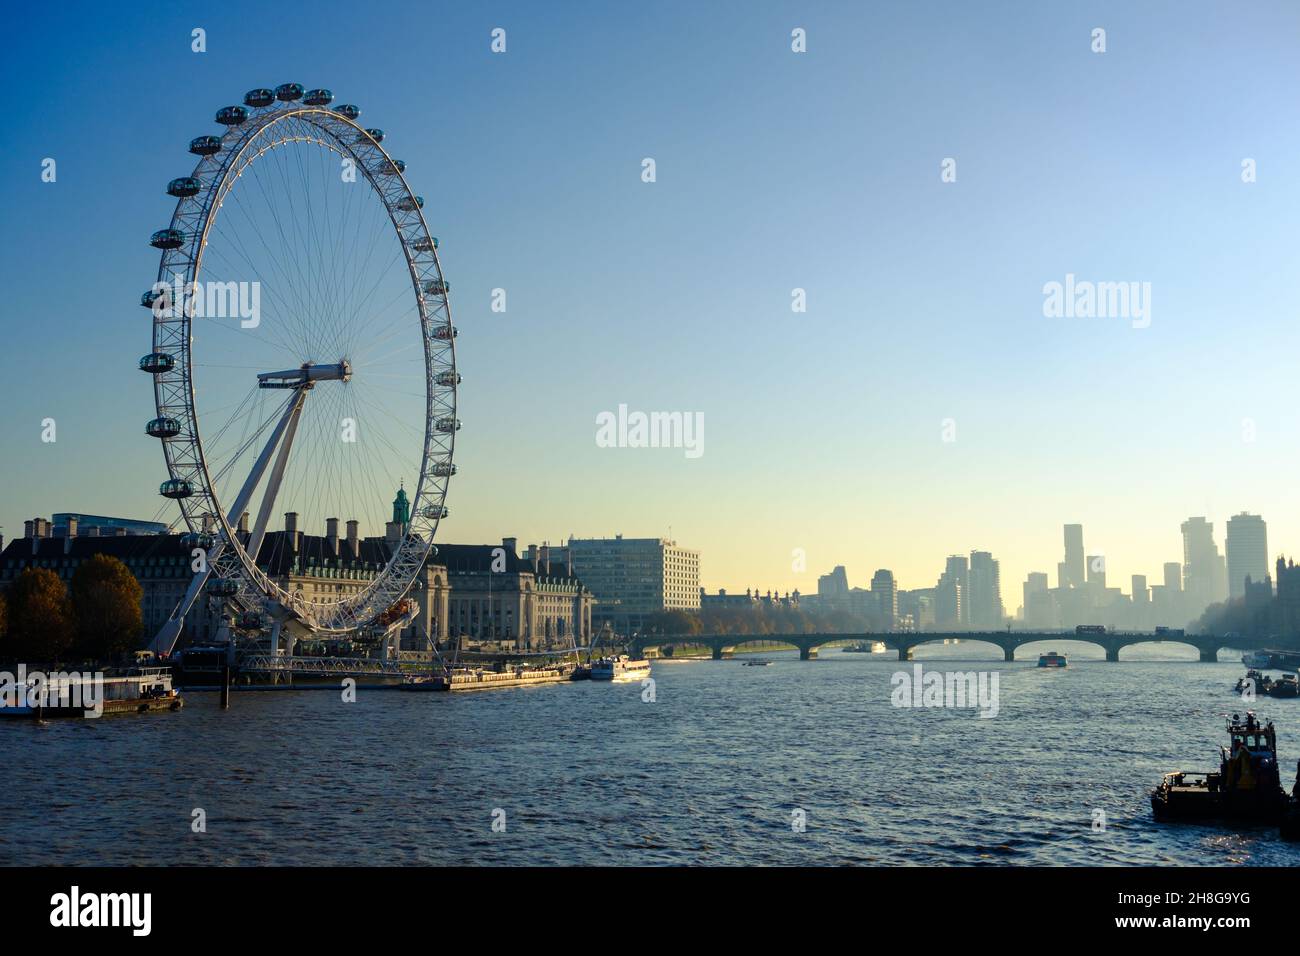 The London Eye on the river Thames Stock Photo